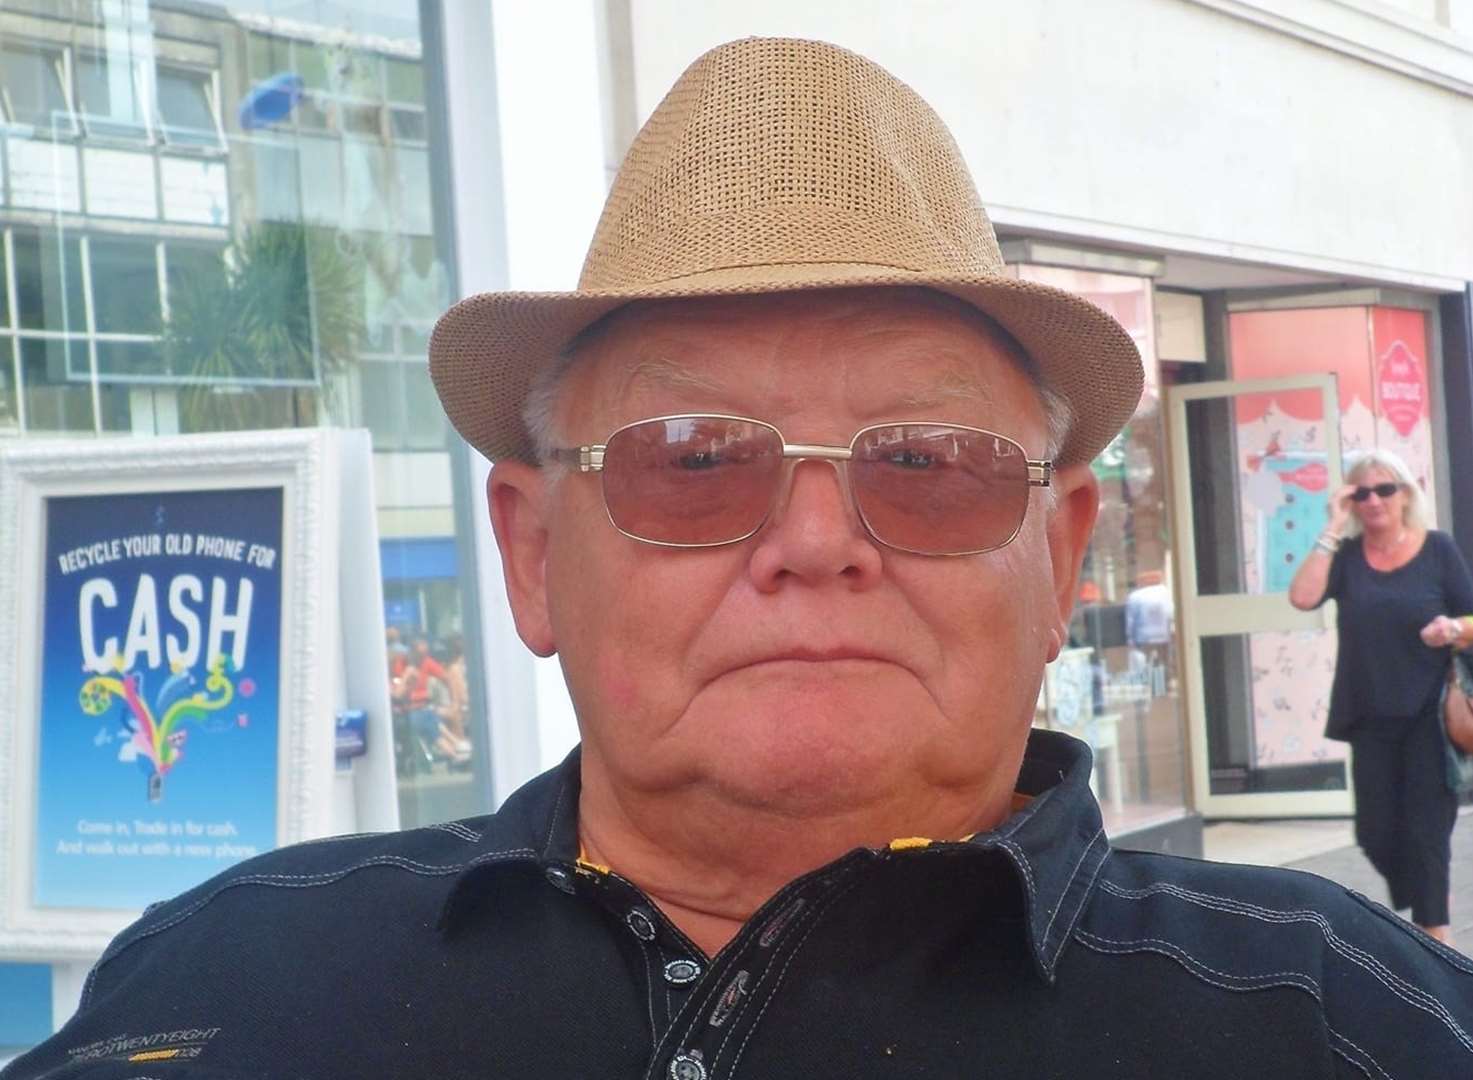 'Murdered' pensioner died from head injury